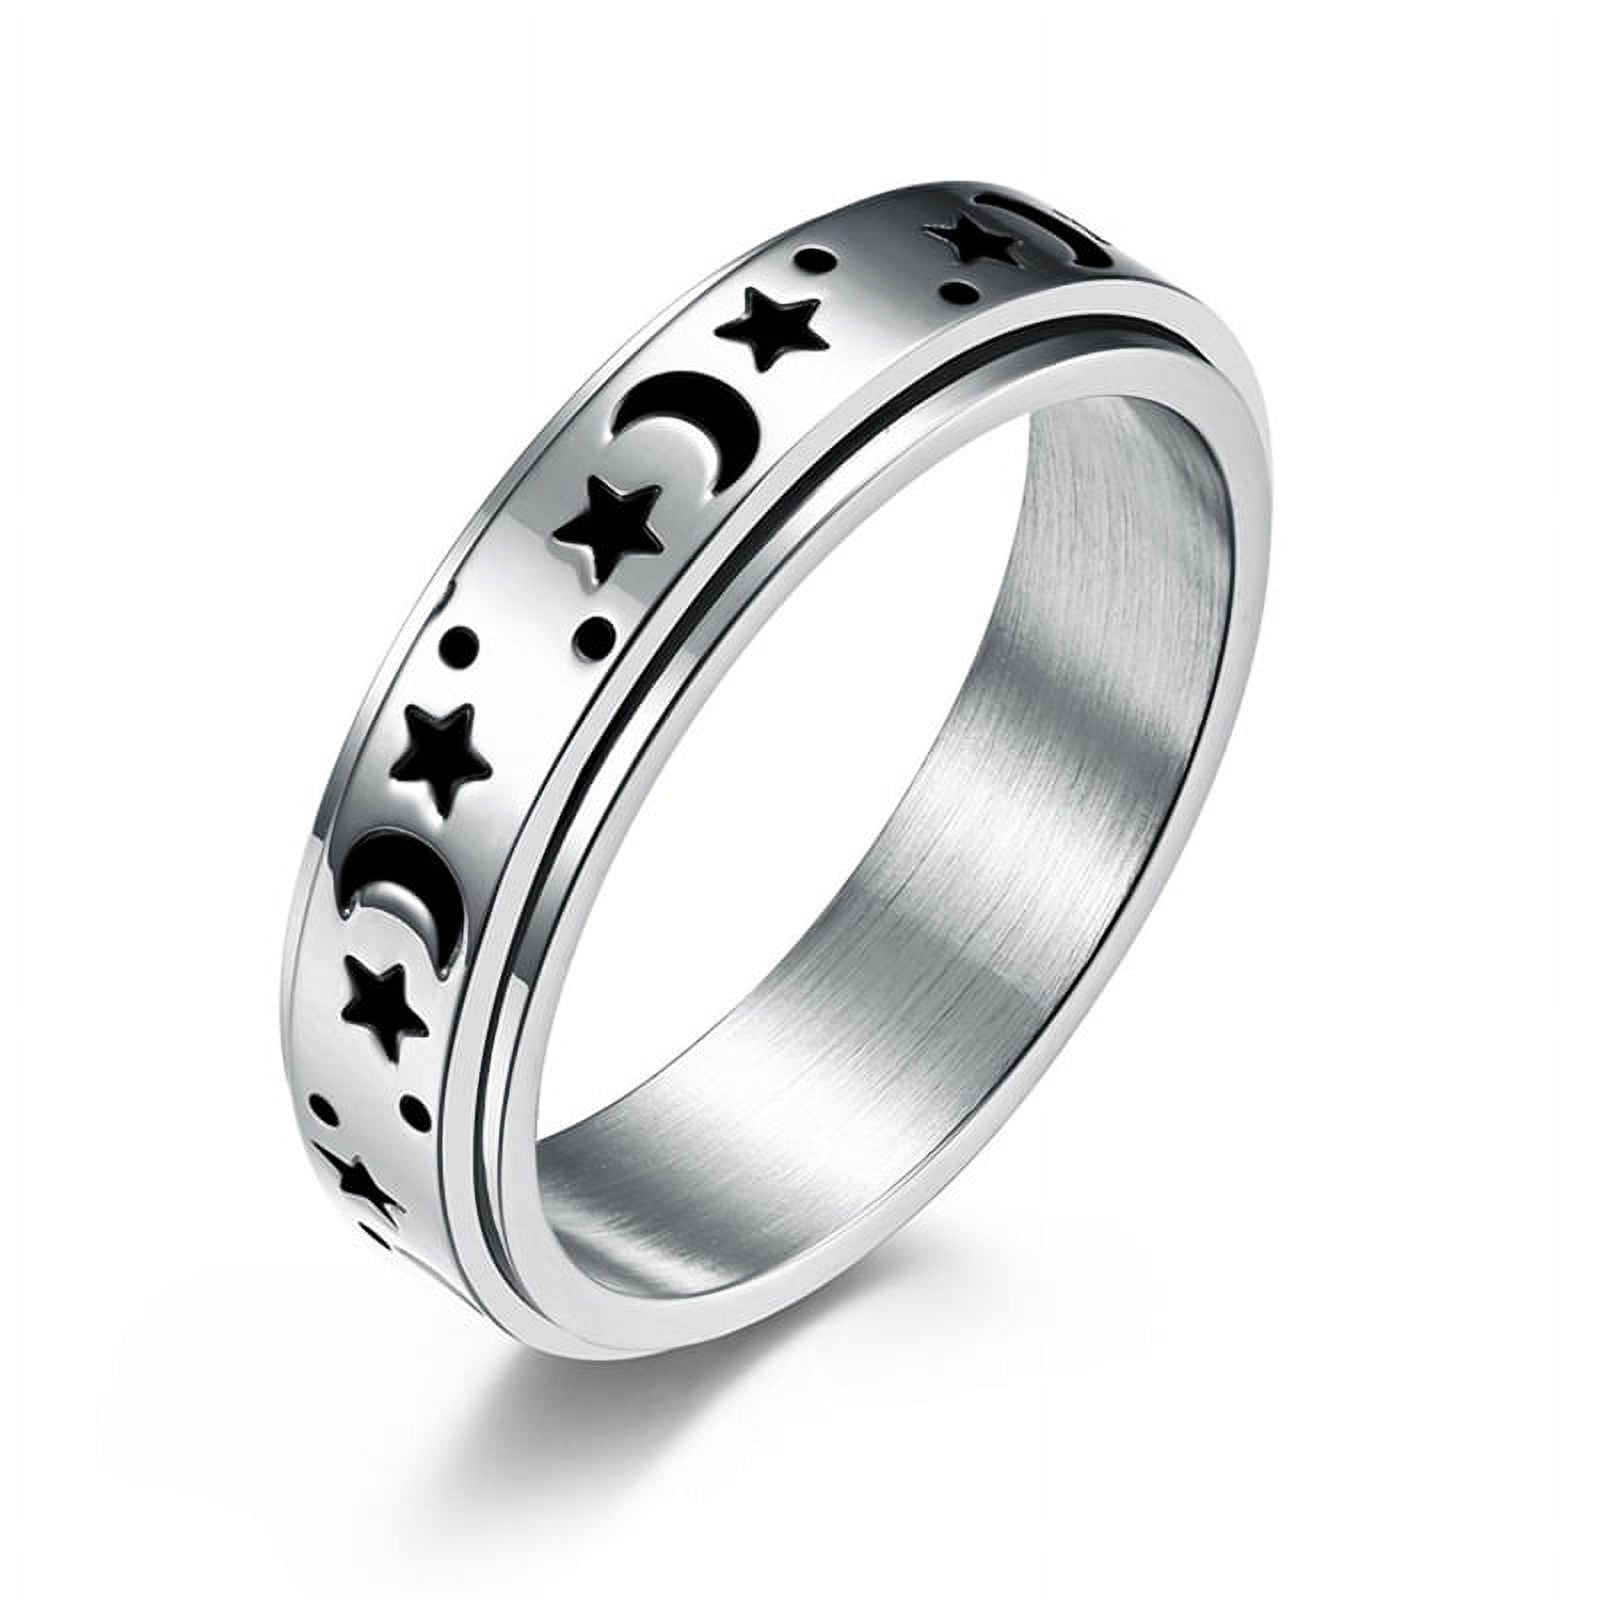 HEQU Titanium Stainless Steel Spinner Rings Moon and Star Fidget Ring Stress Relieving Anxiety Ring Engagement Wedding Promise Band 8ef2ffb4 7da1 4674 8b87 3fcf69c55fa6.9b540d077b9b8df46883c496e9cb2224